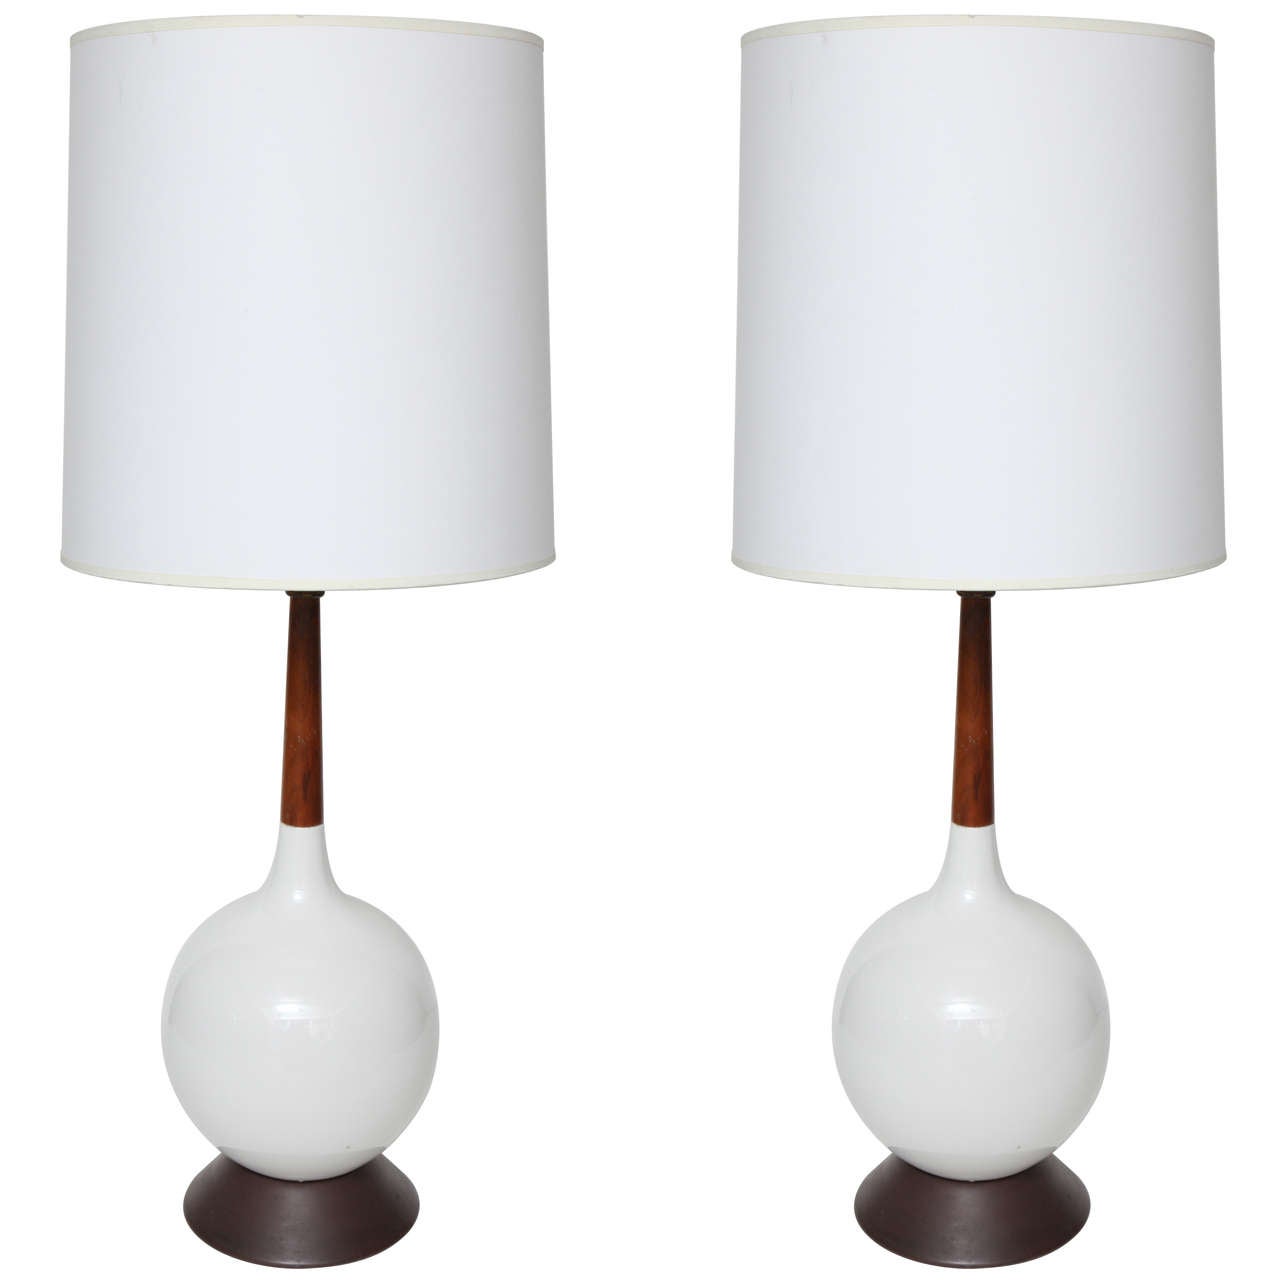 Pair of White Ceramic & Walnut Table Lamps